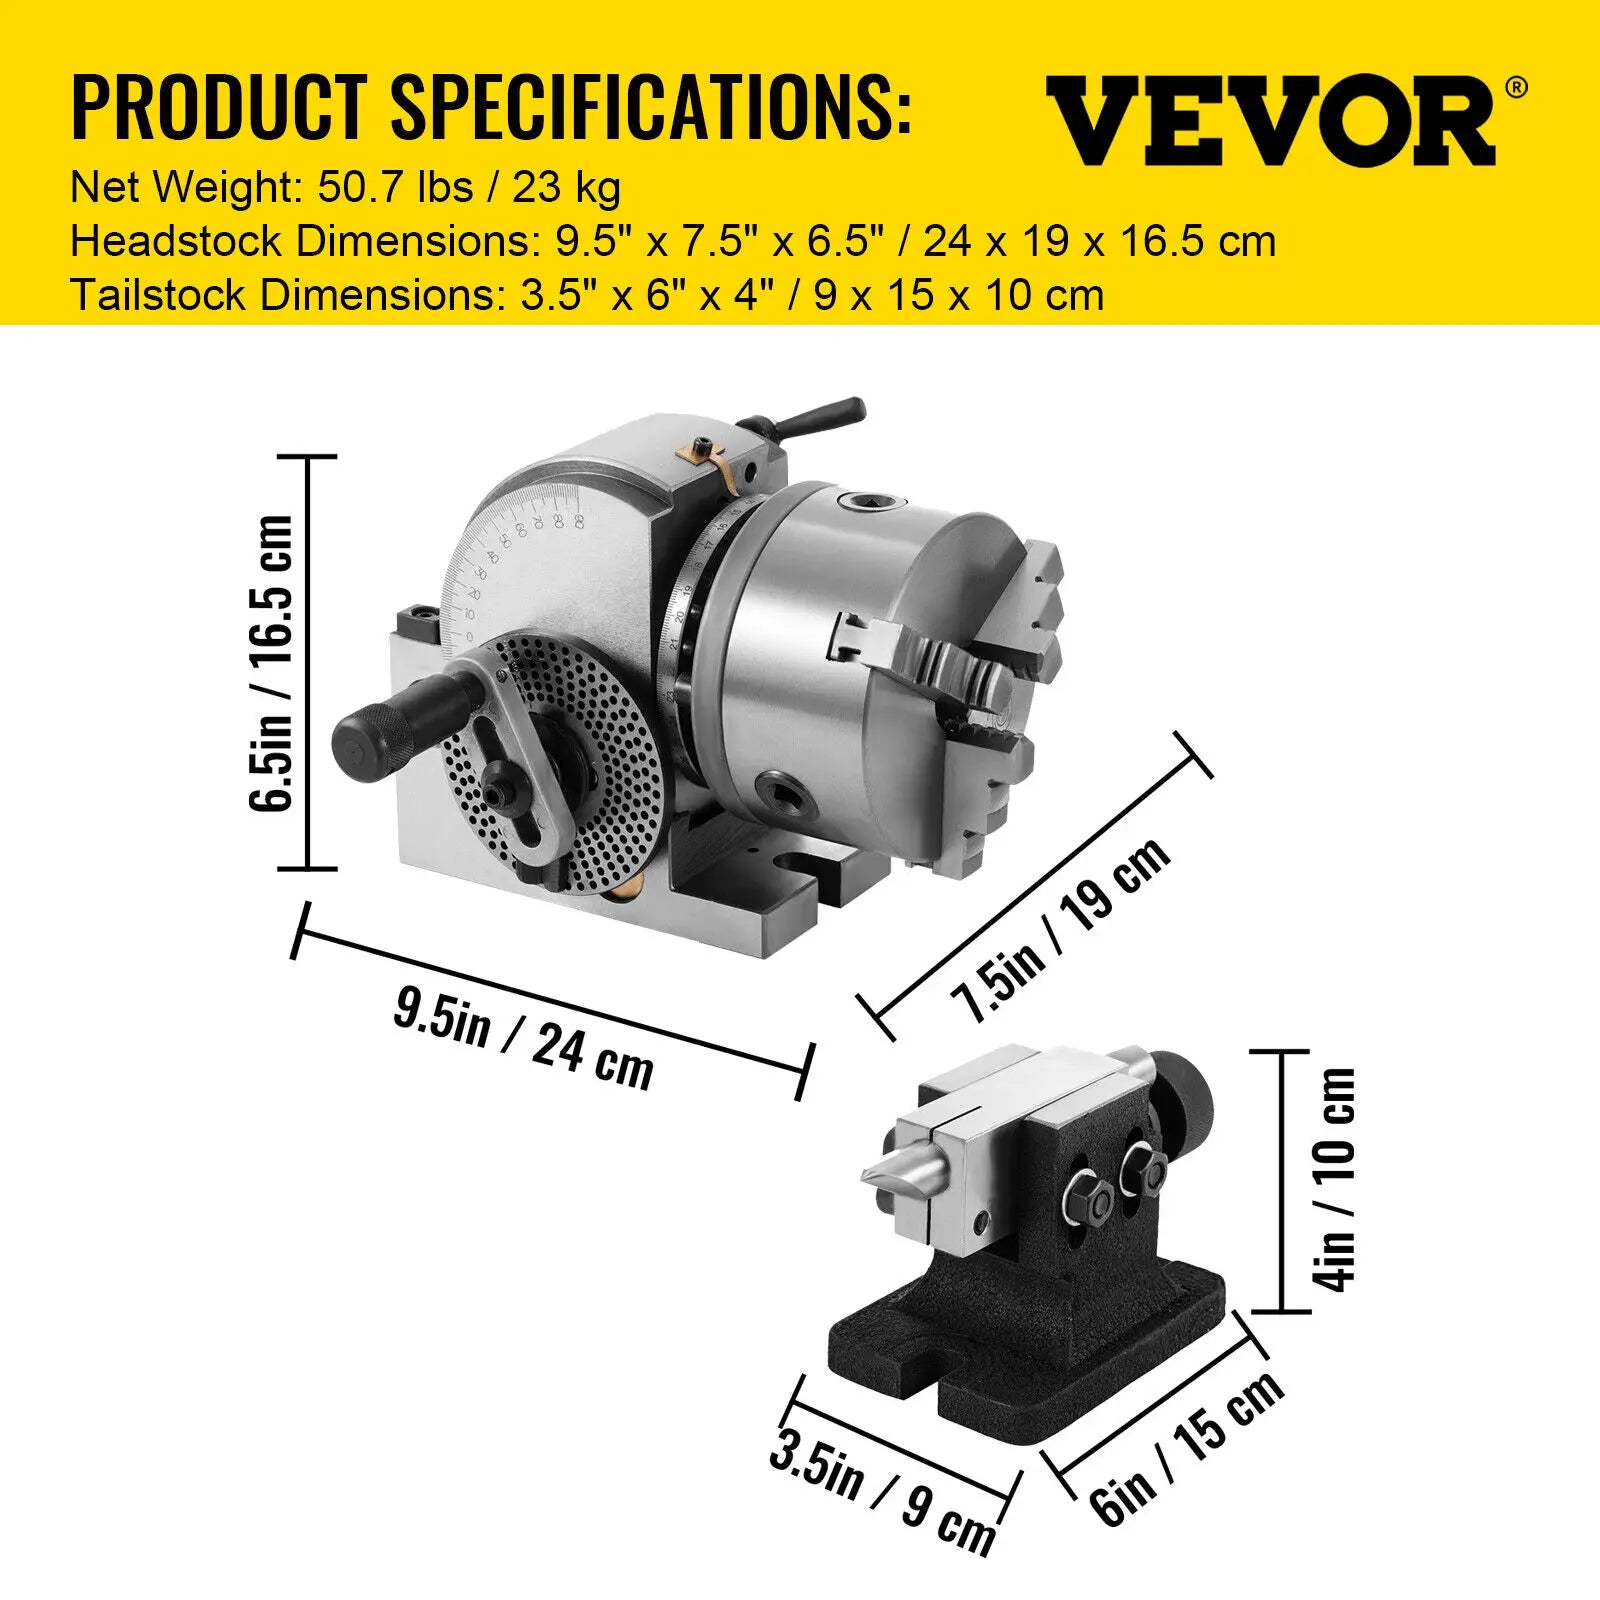 VEVOR BS0 5" Dividing Head Indexing Head Semi Universal With Indexing Plates, Tailstock & 125mm 3-Jaw Chuck for Drilling Milling